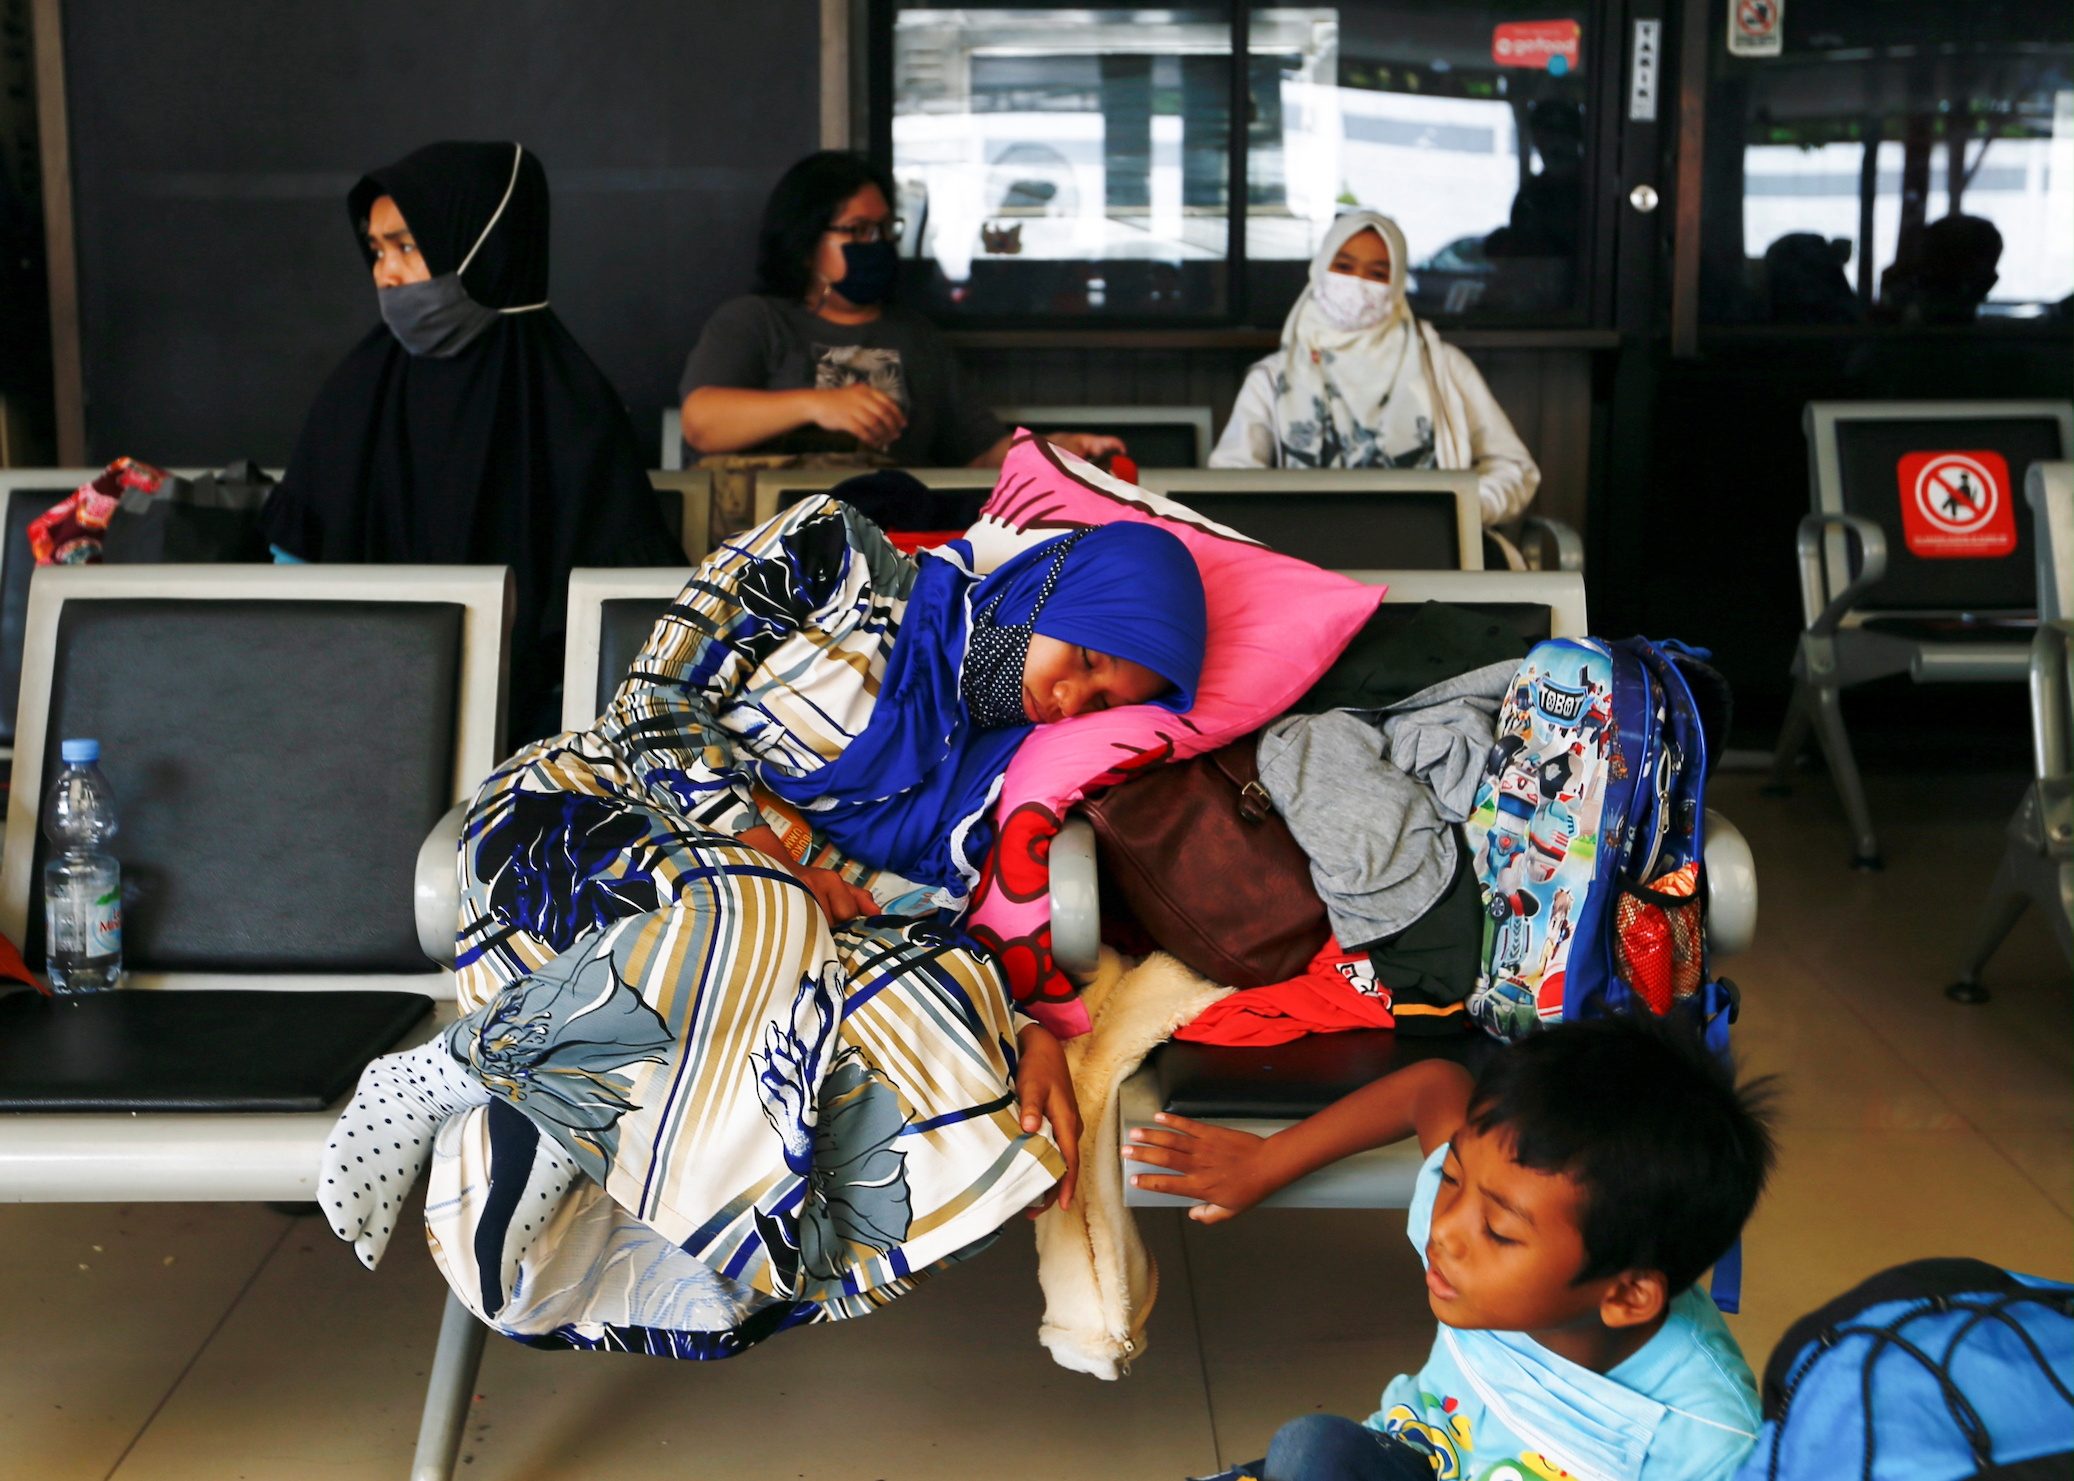 Indonesia begins Eid al-Fitr travel ban as some try to skirt rules